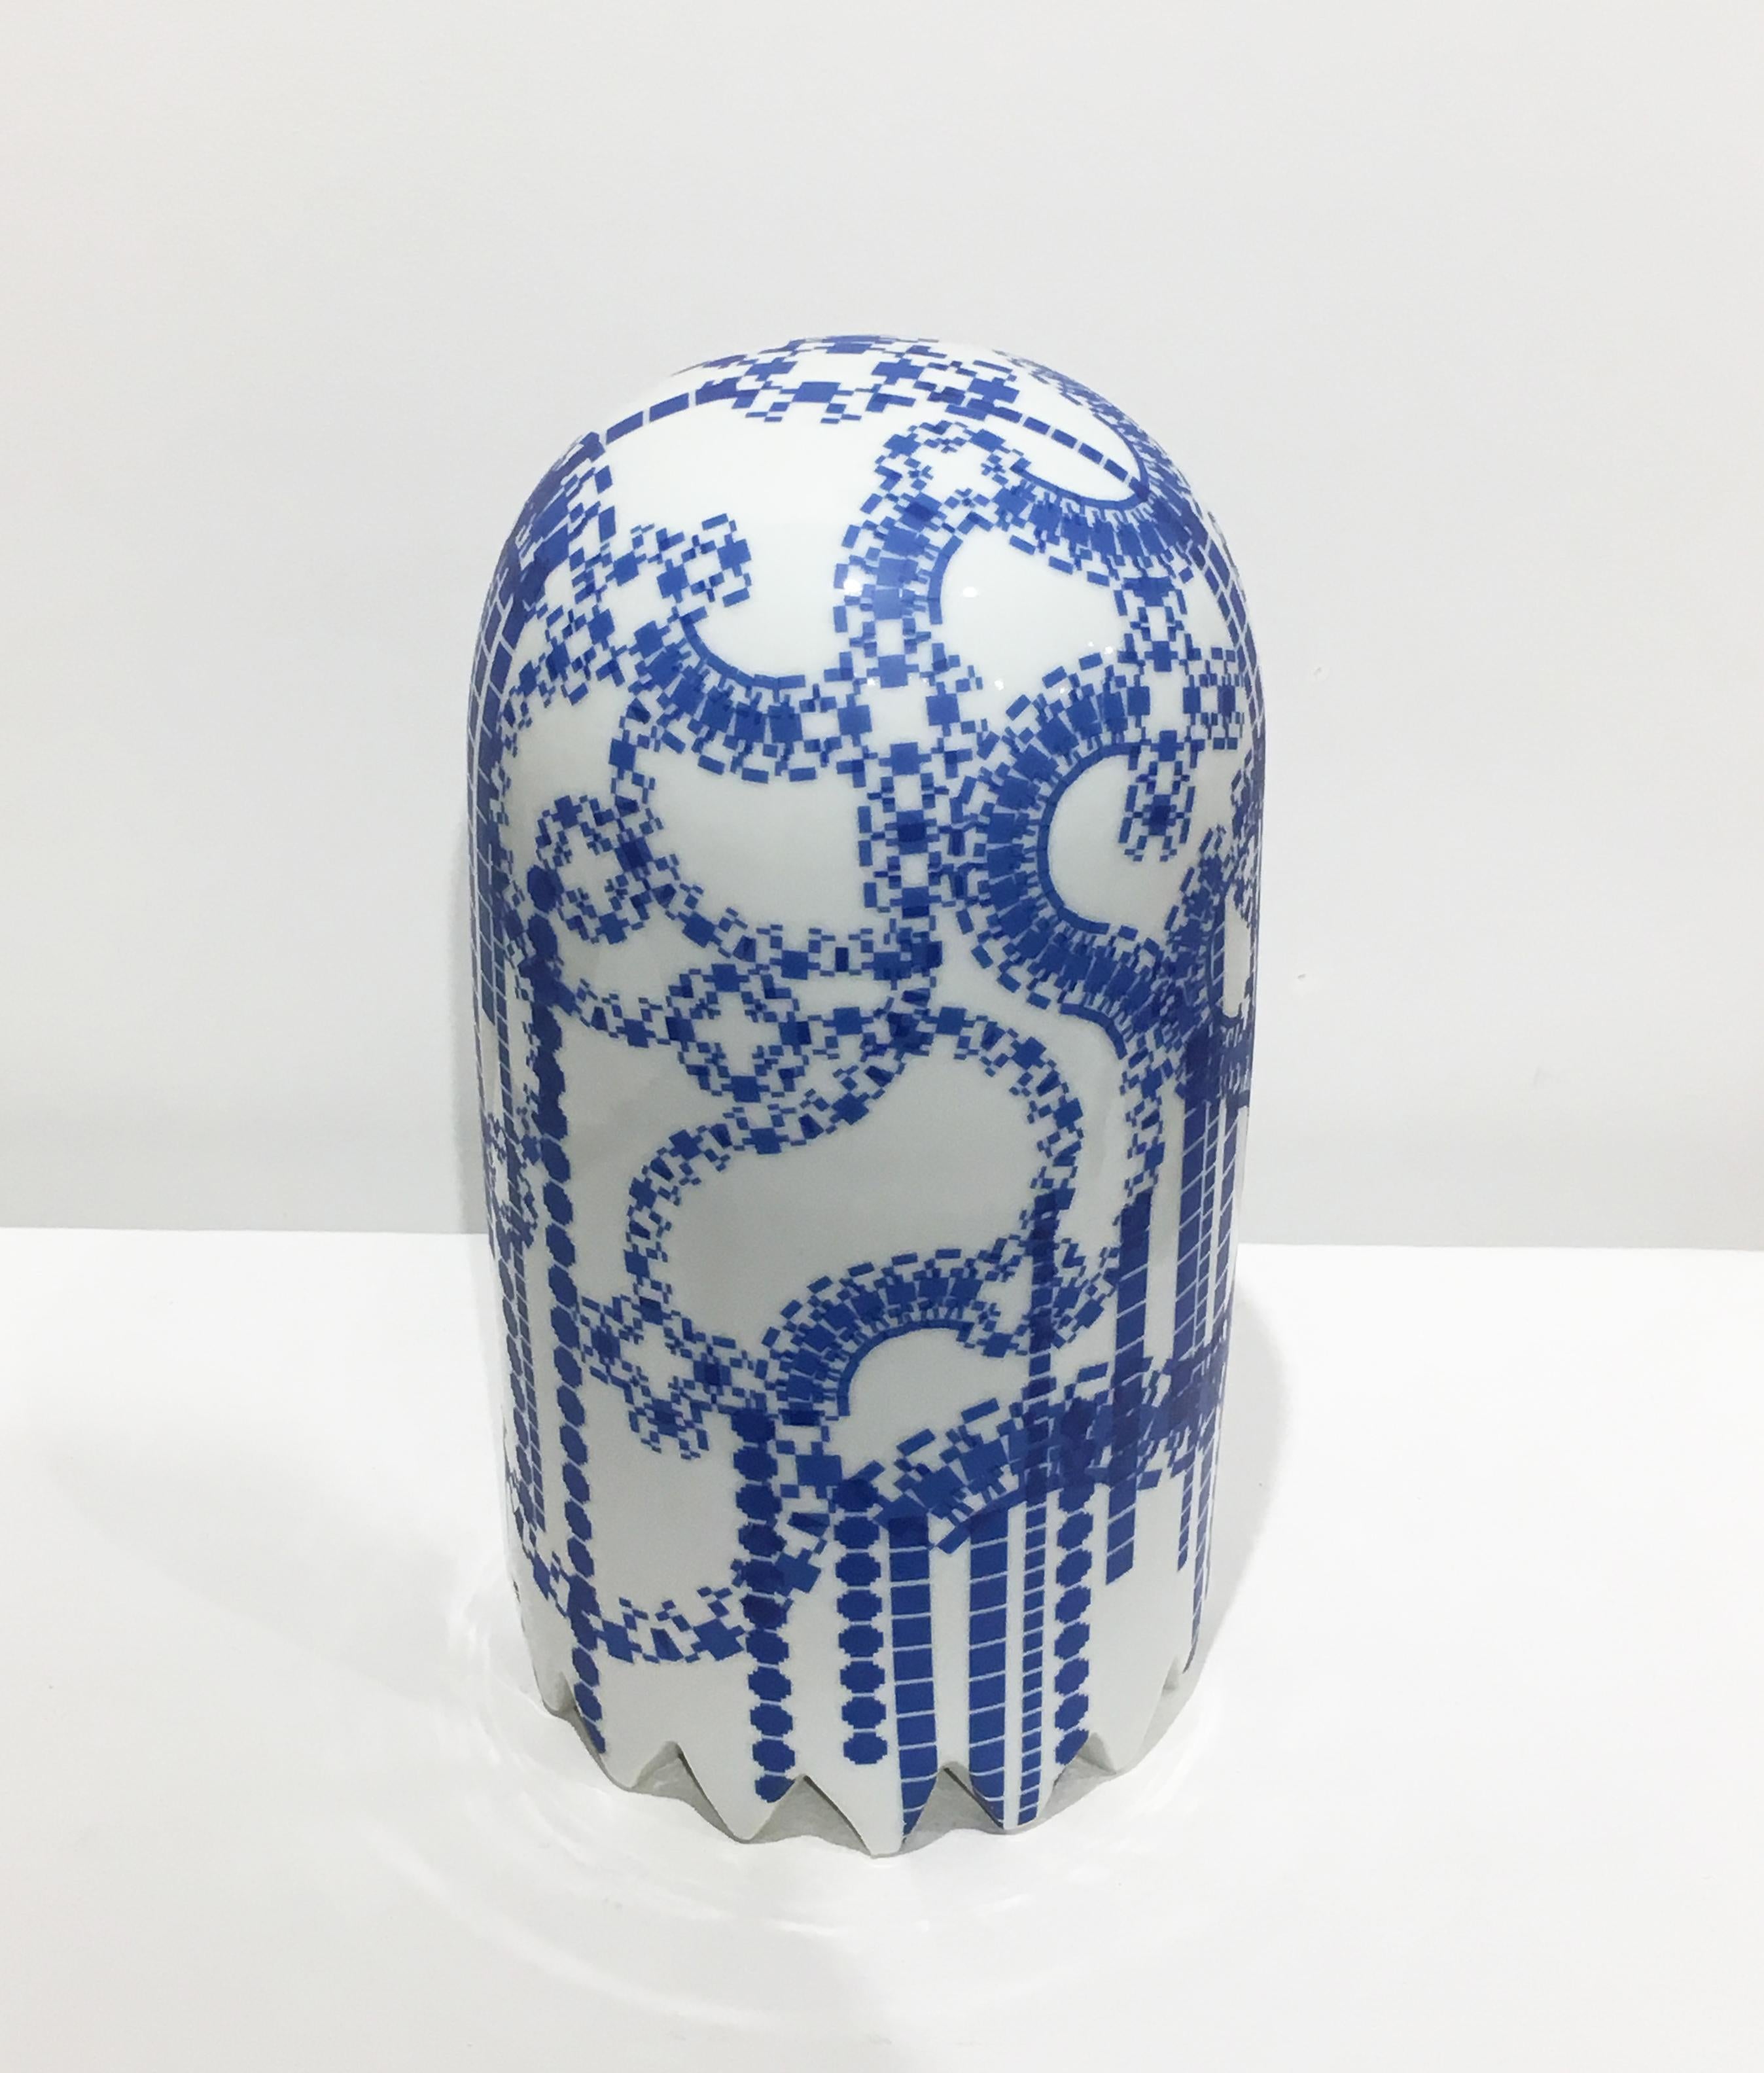 Ghost with Blue Decals, Contemporary Ceramic Porcelain Sculpture - White Abstract Sculpture by Jesse Small